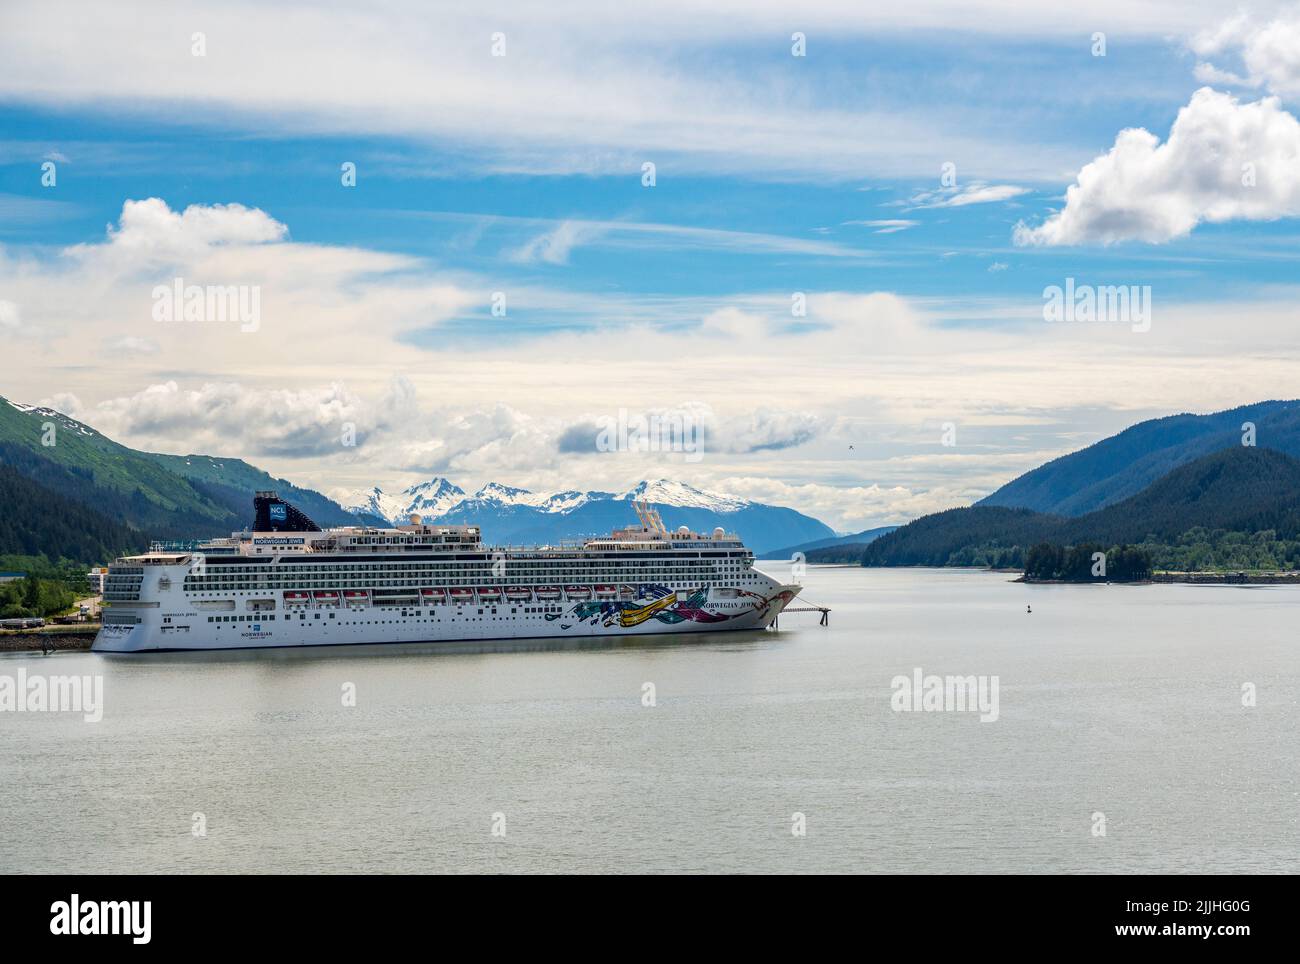 Juneau, AK - 9 June 2022: View of the port of Juneau in Alaska with Norwegian Jewel cruise ship anchored in the bay Stock Photo